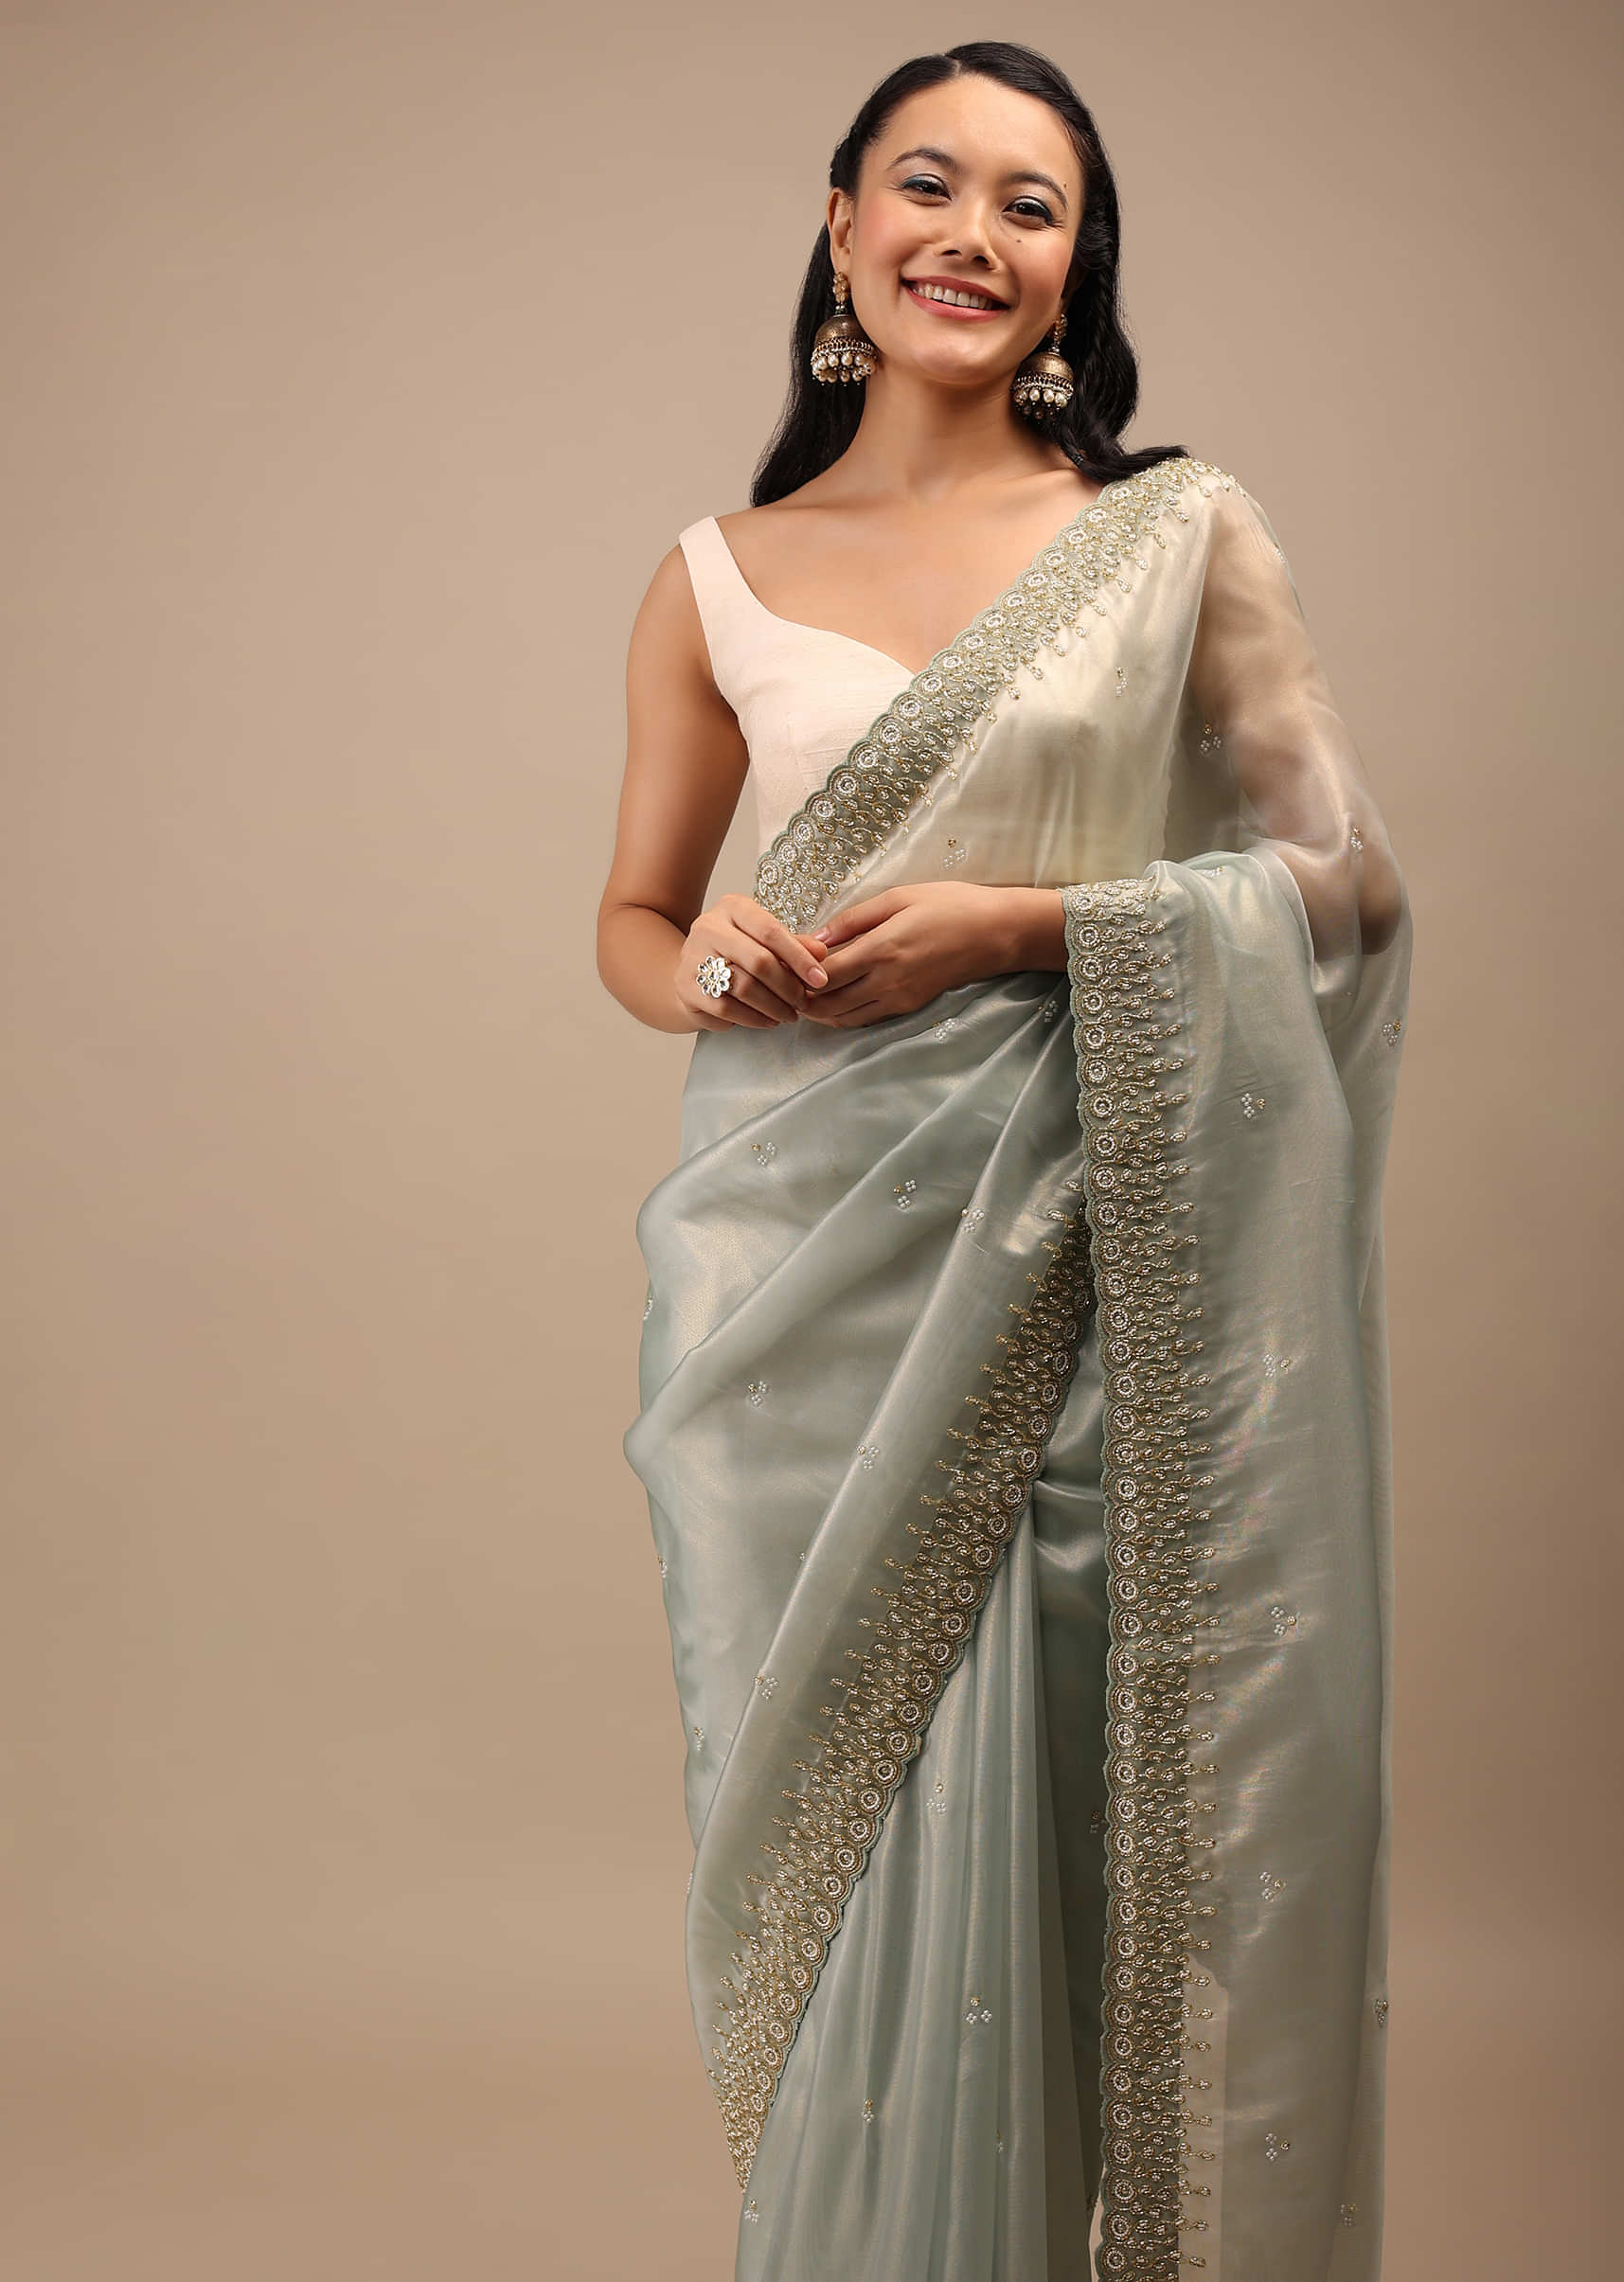 Green Tint Organza Saree In White Moti Cut Dana, And Beads Embroidery Buttis, Leafy Embroidery Detailing On The Border